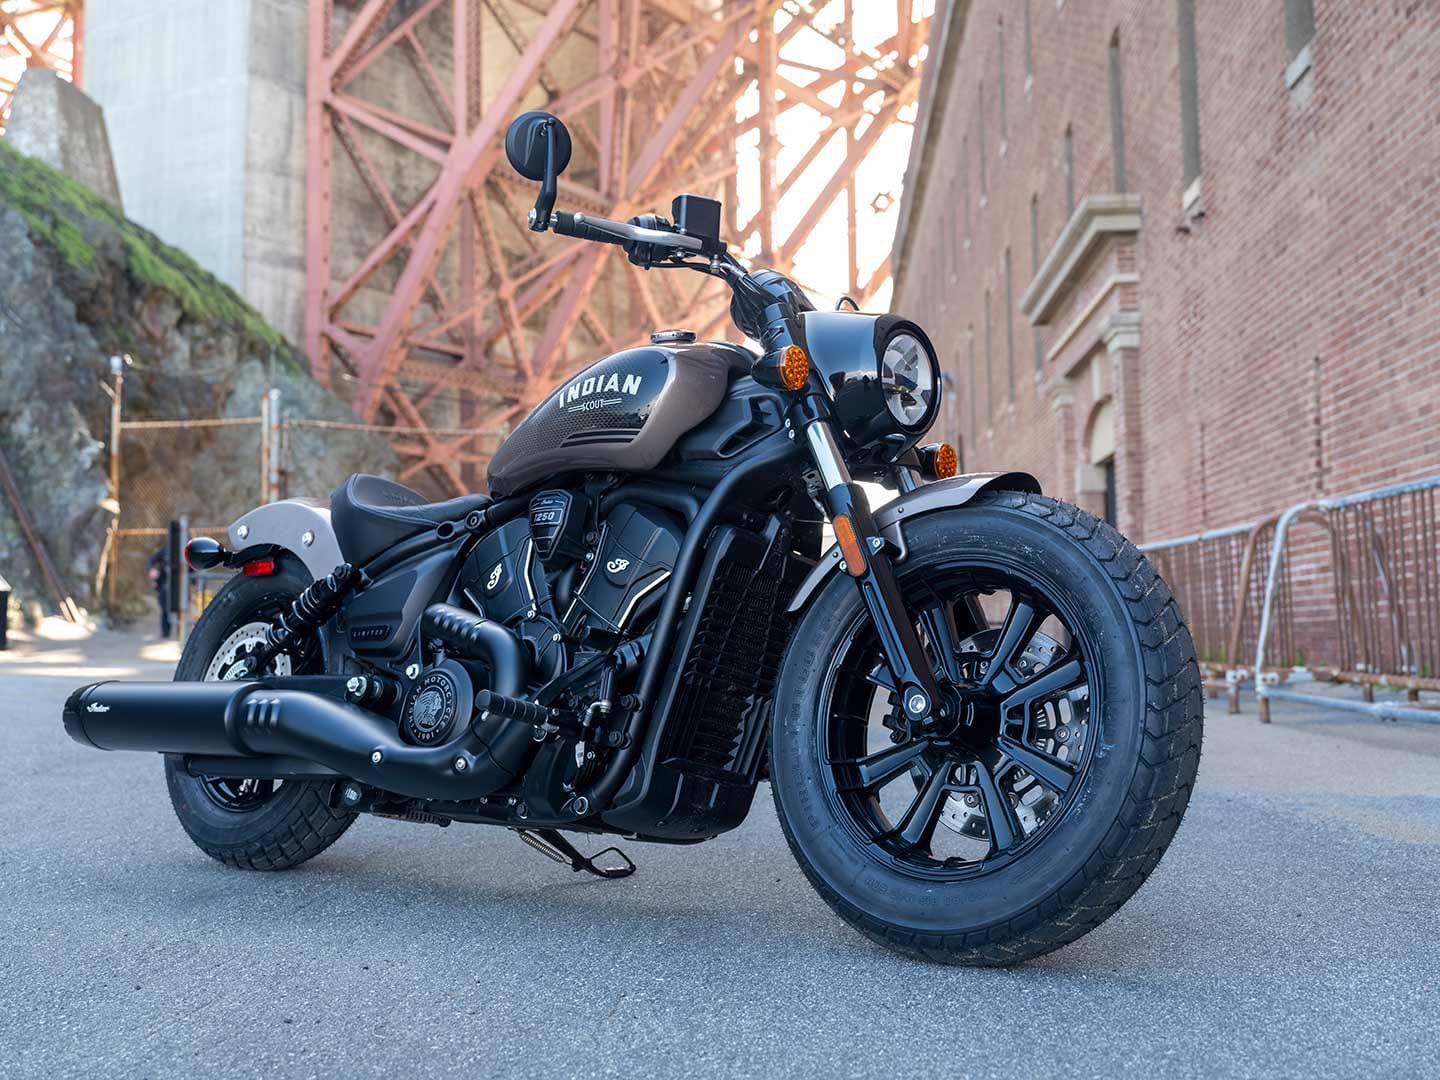 The Scout Bobber has 1 inch less rear suspension travel at just 2 inches. | Photo: Tim Sutton